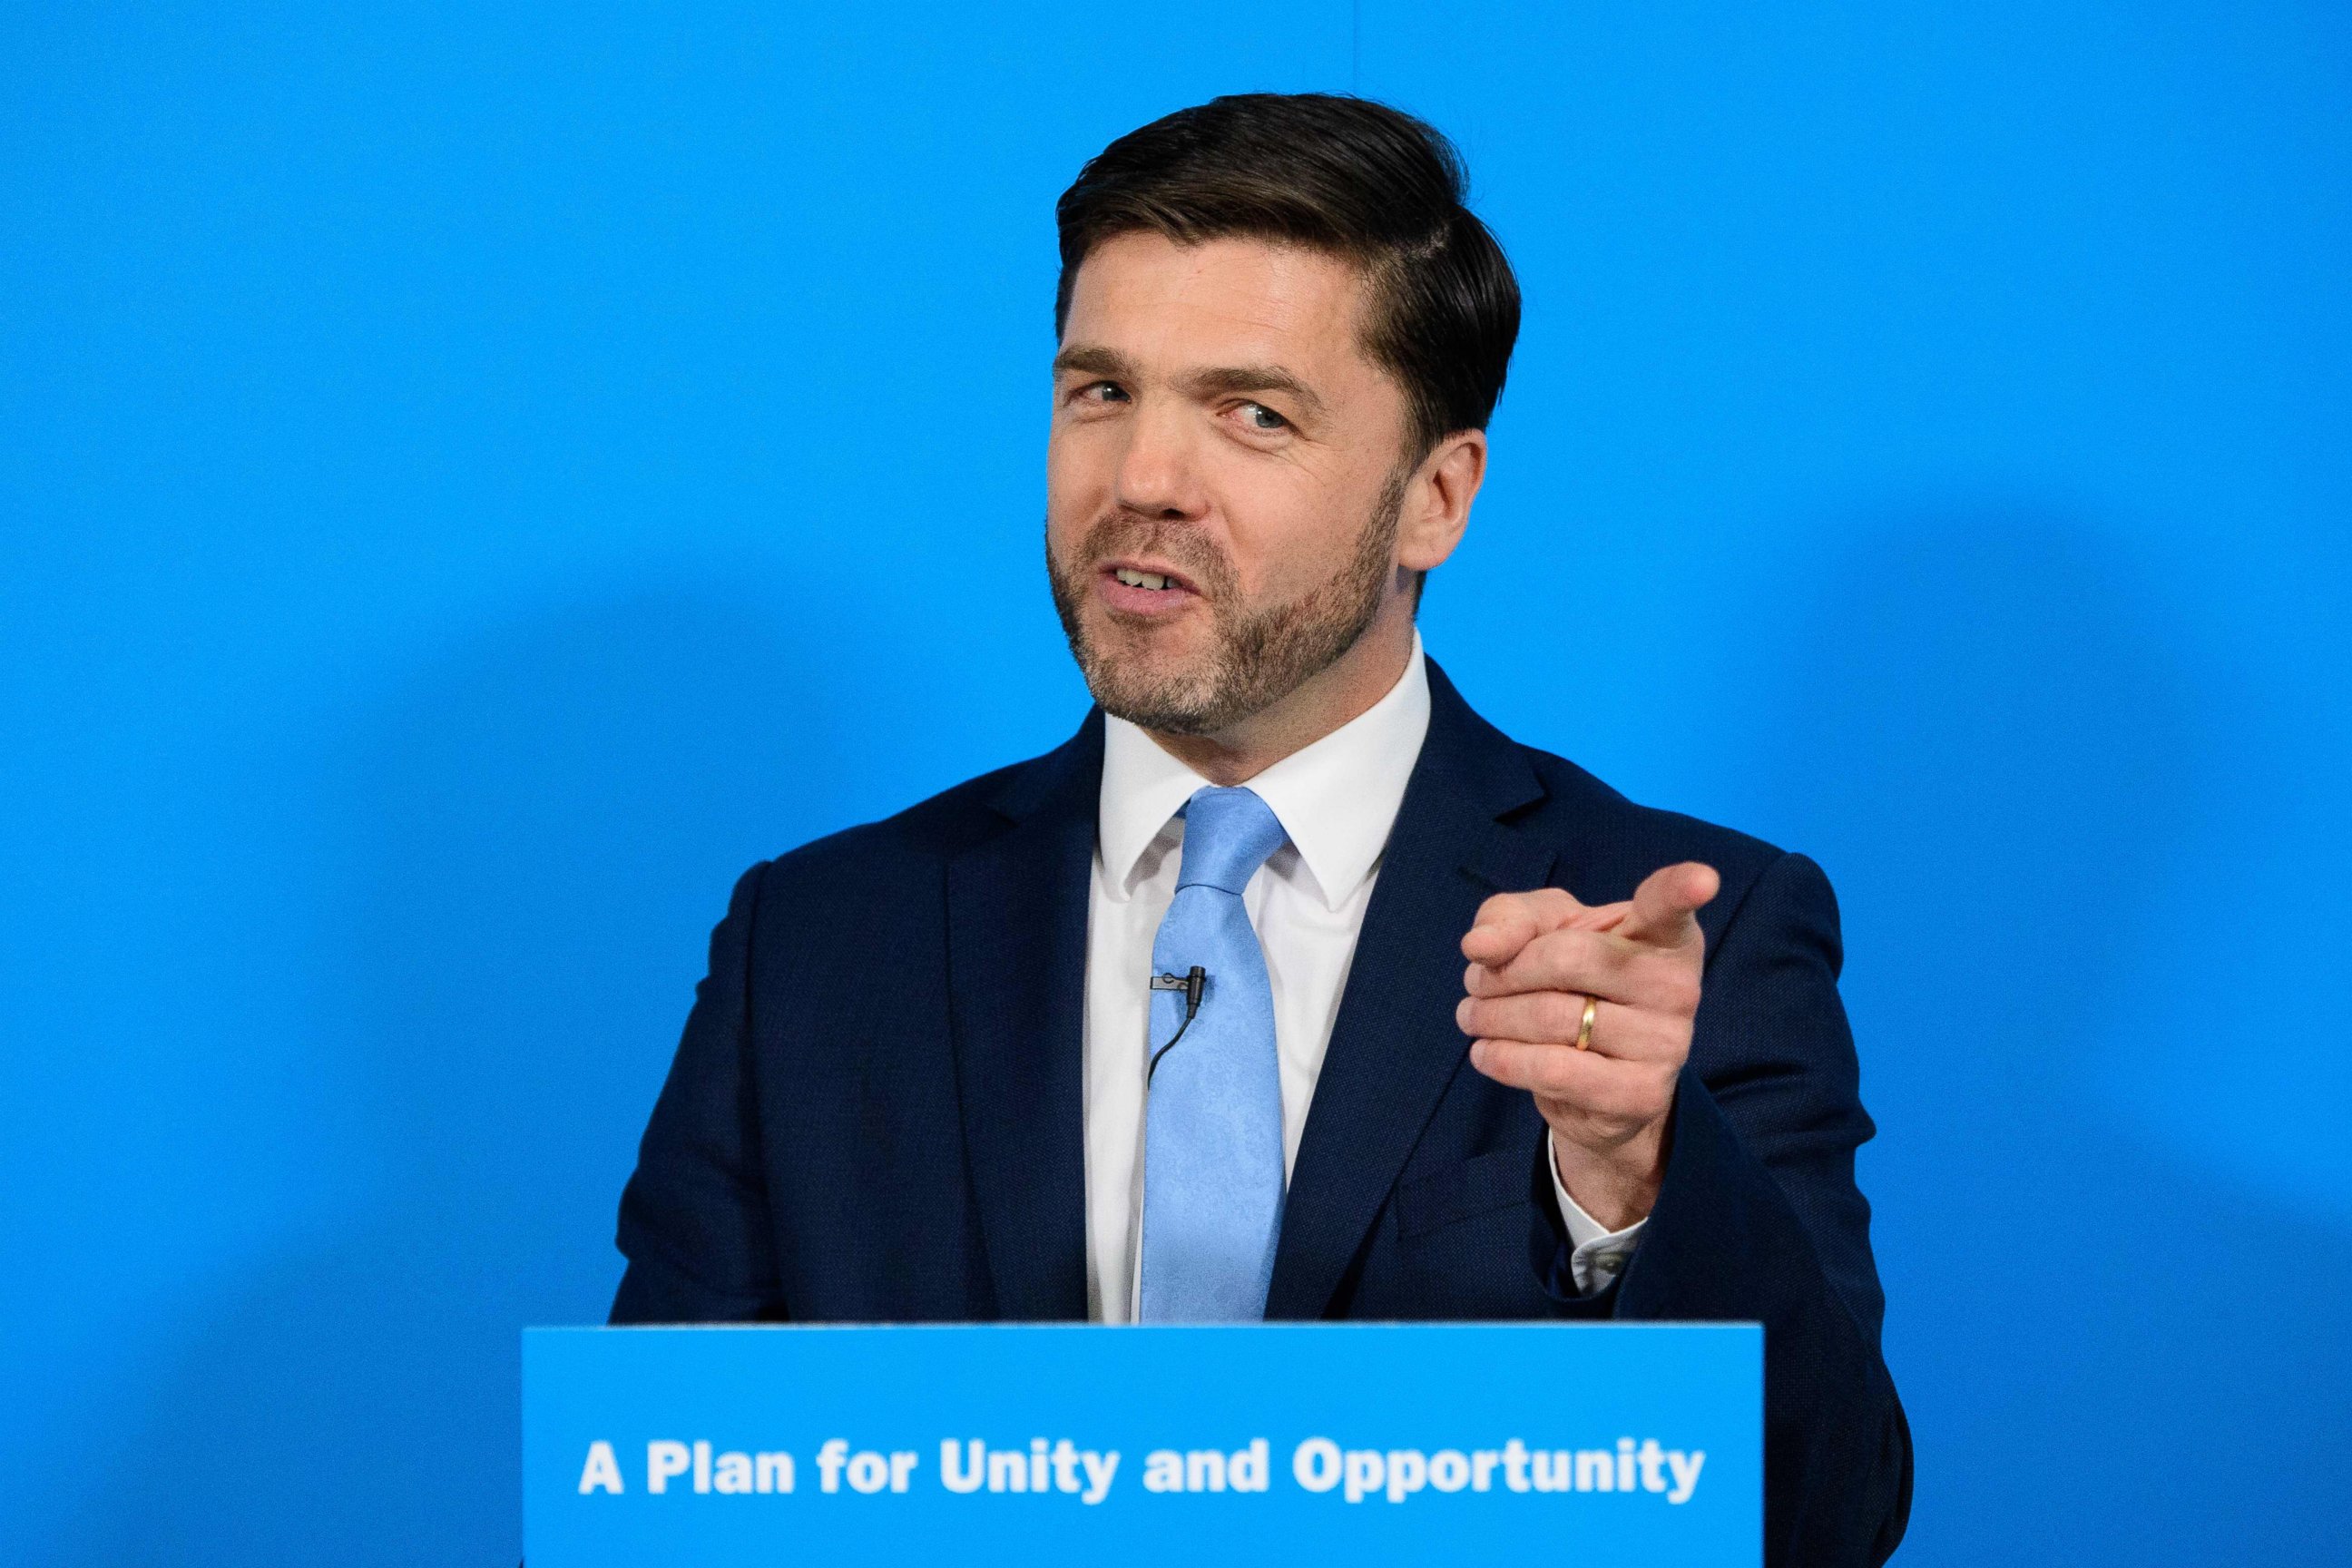 PHOTO: British Work and Pensions Secretary and Conservative MP, Stephen Crabb, speaks at a news conference in central London, June 29, 2016.